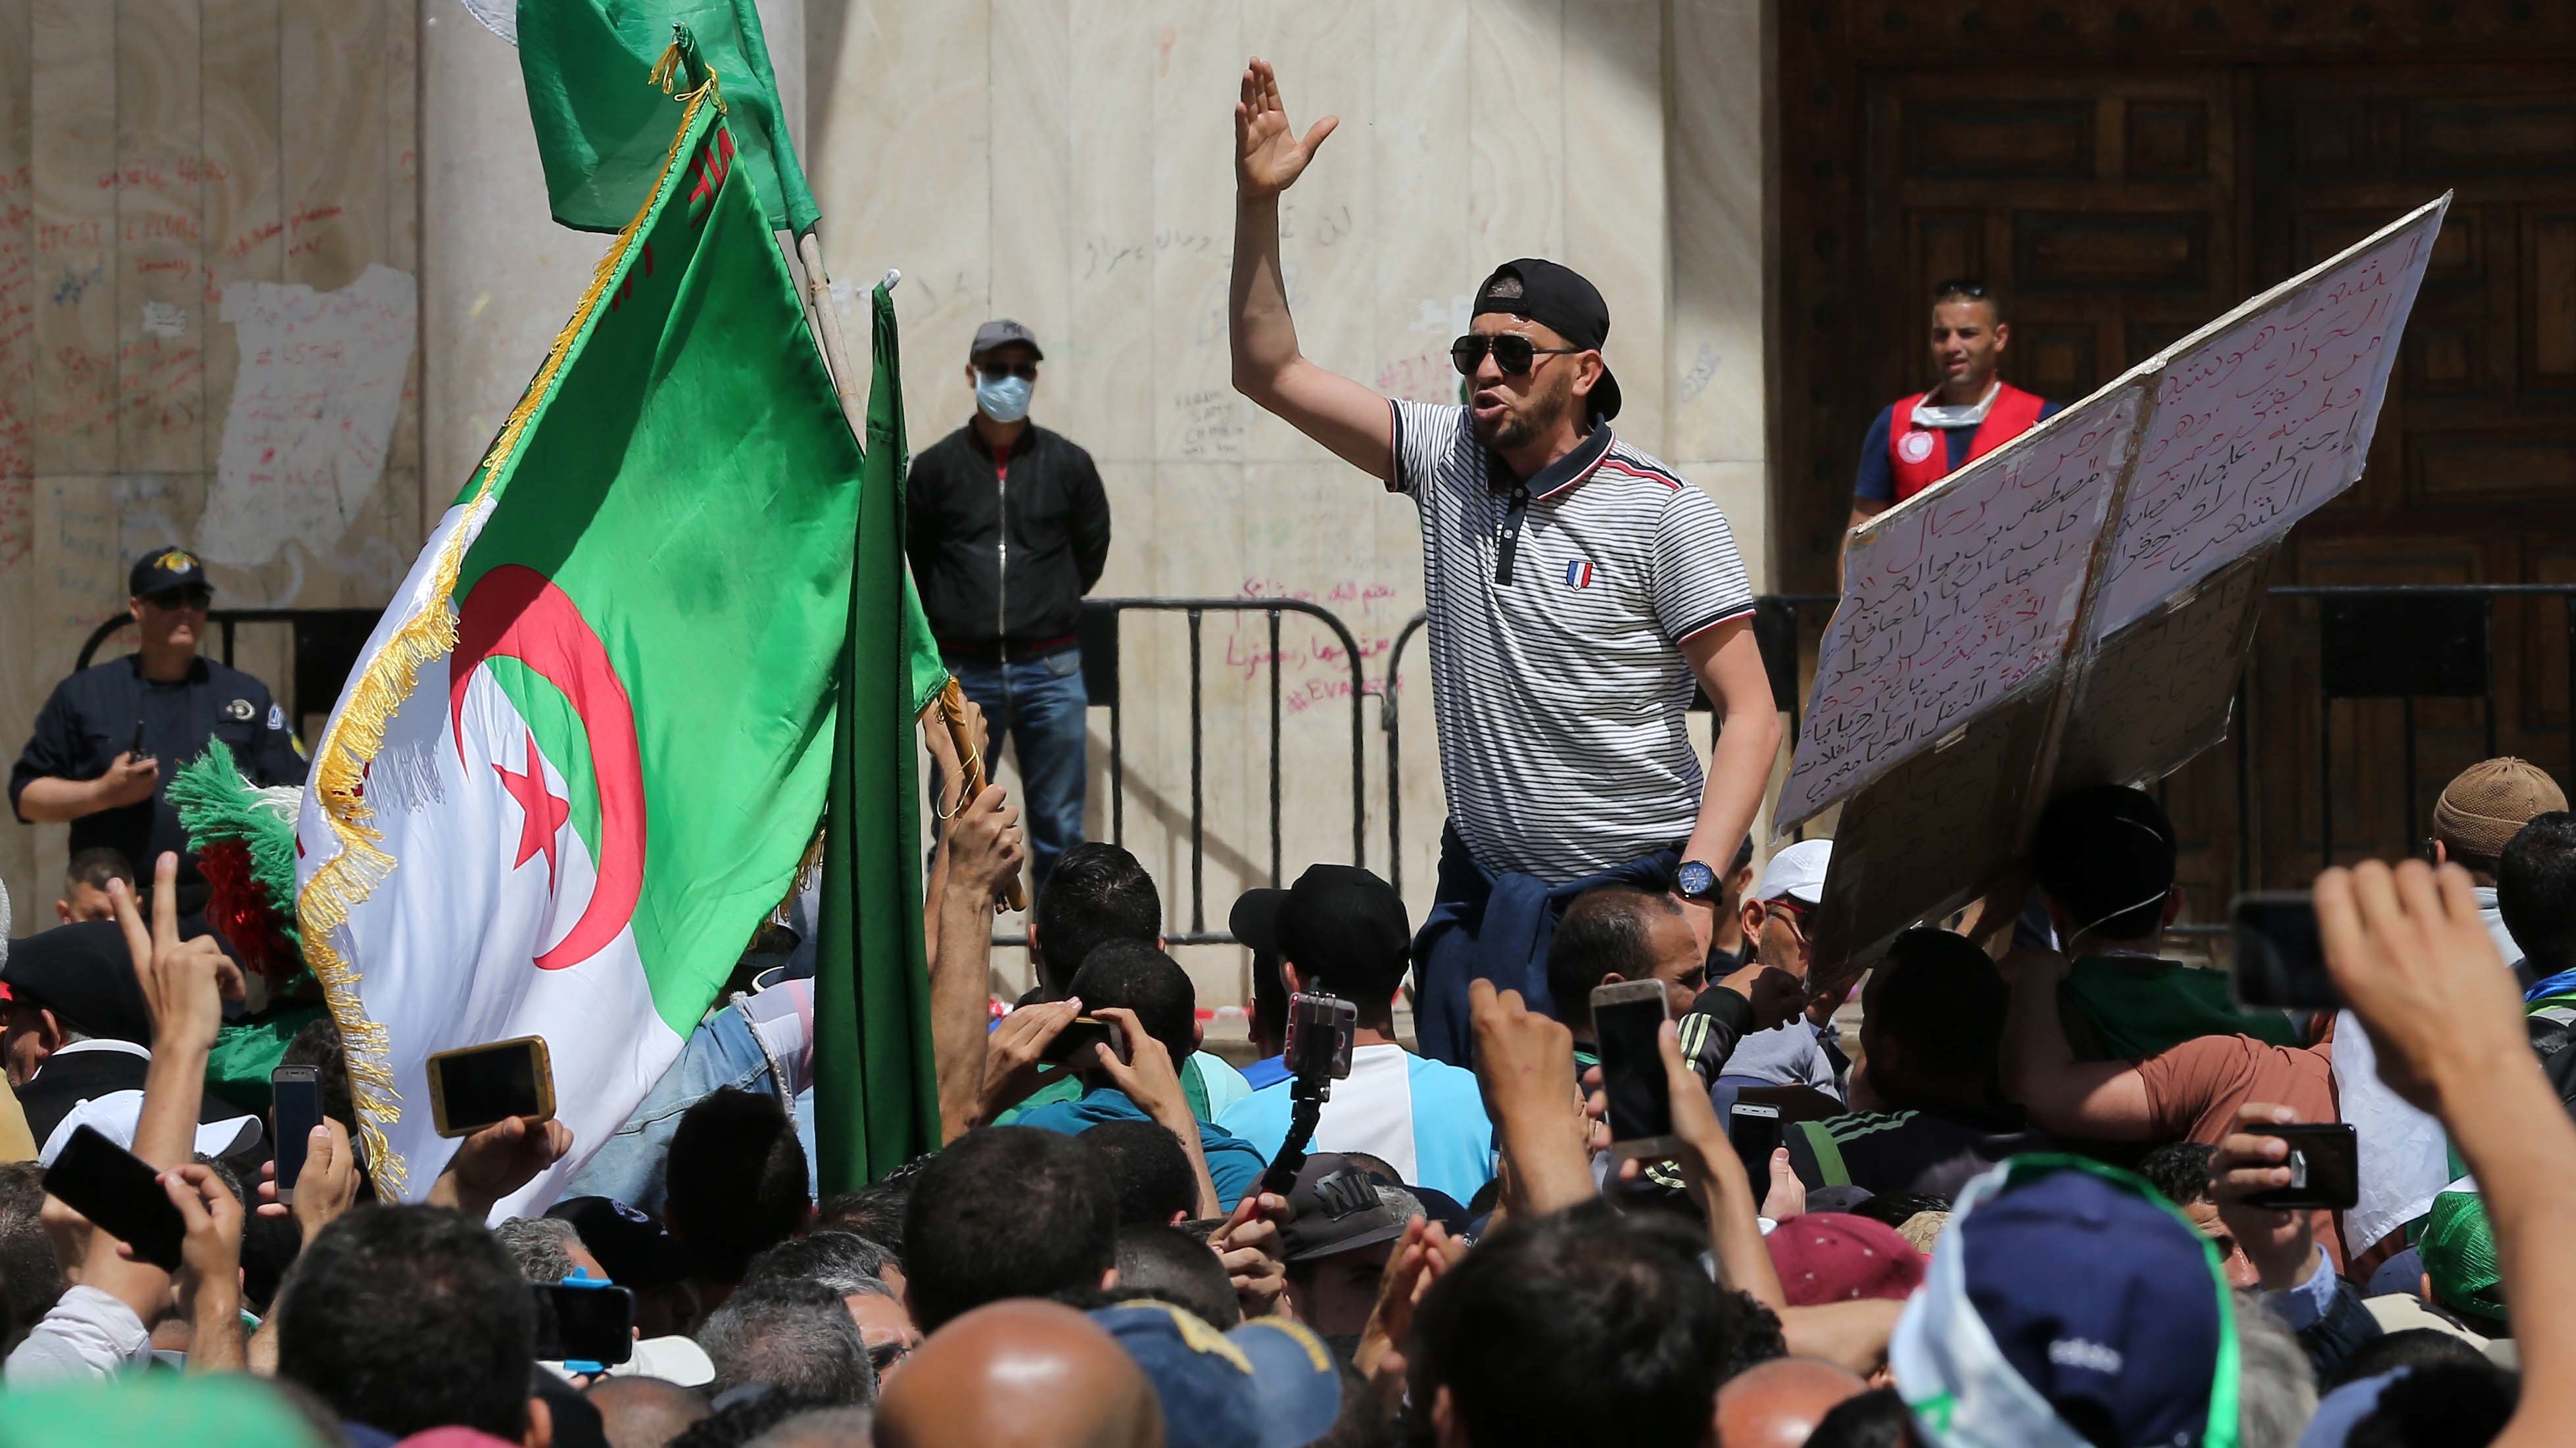 Algerian Army Chief Emphasizes Need for July Election